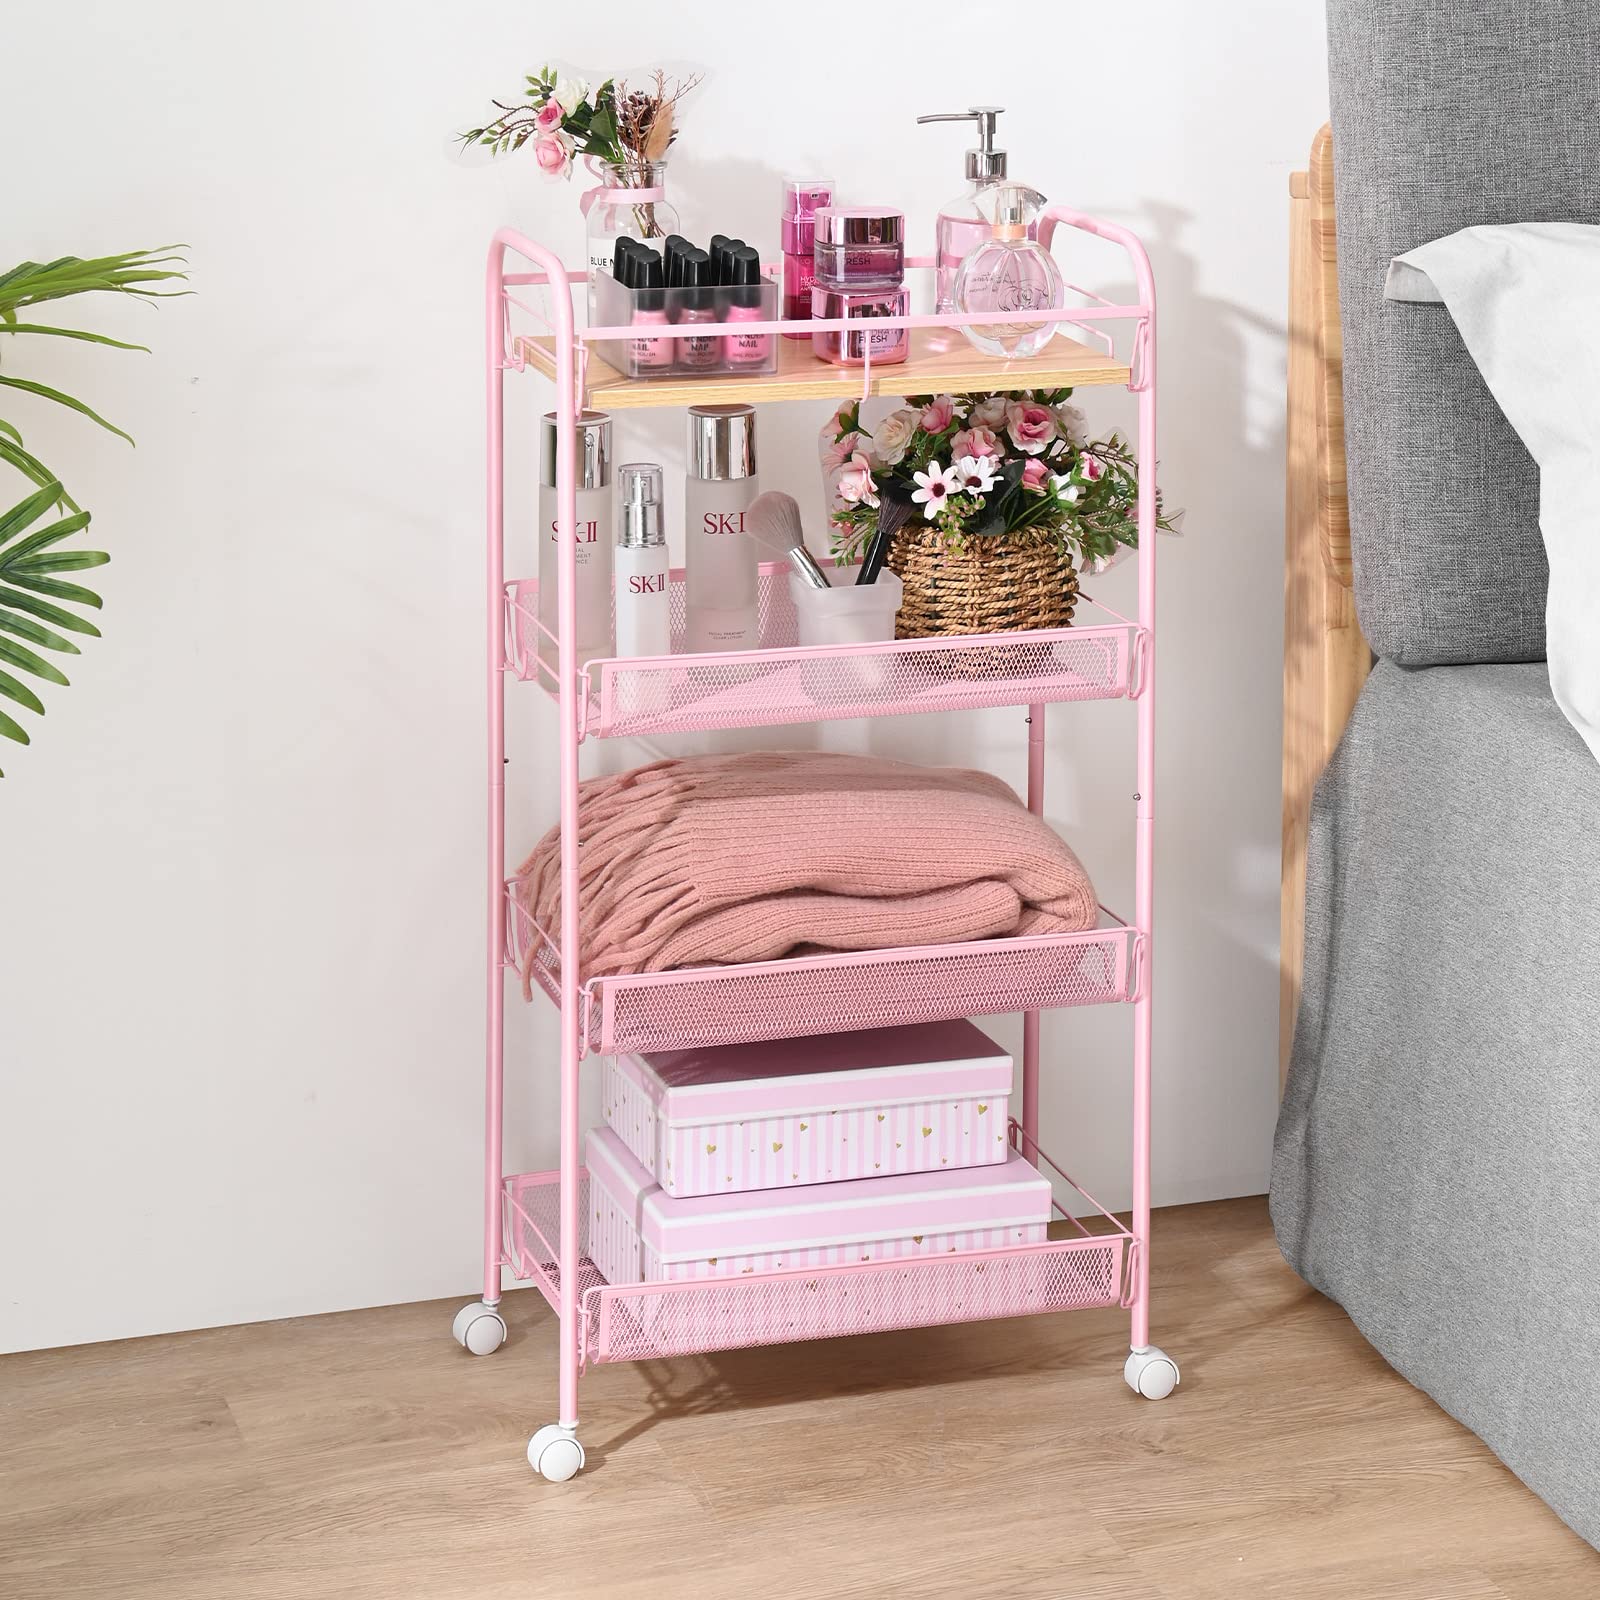 KINGRACK 4-Tier Metal Rolling Utility Cart, Pink, Flexible, Sturdy, Easy Assembly, Anti-Rust, Waterproof, Scratch-Resistant, Breathable Mesh Basket, Ideal for Home Storage